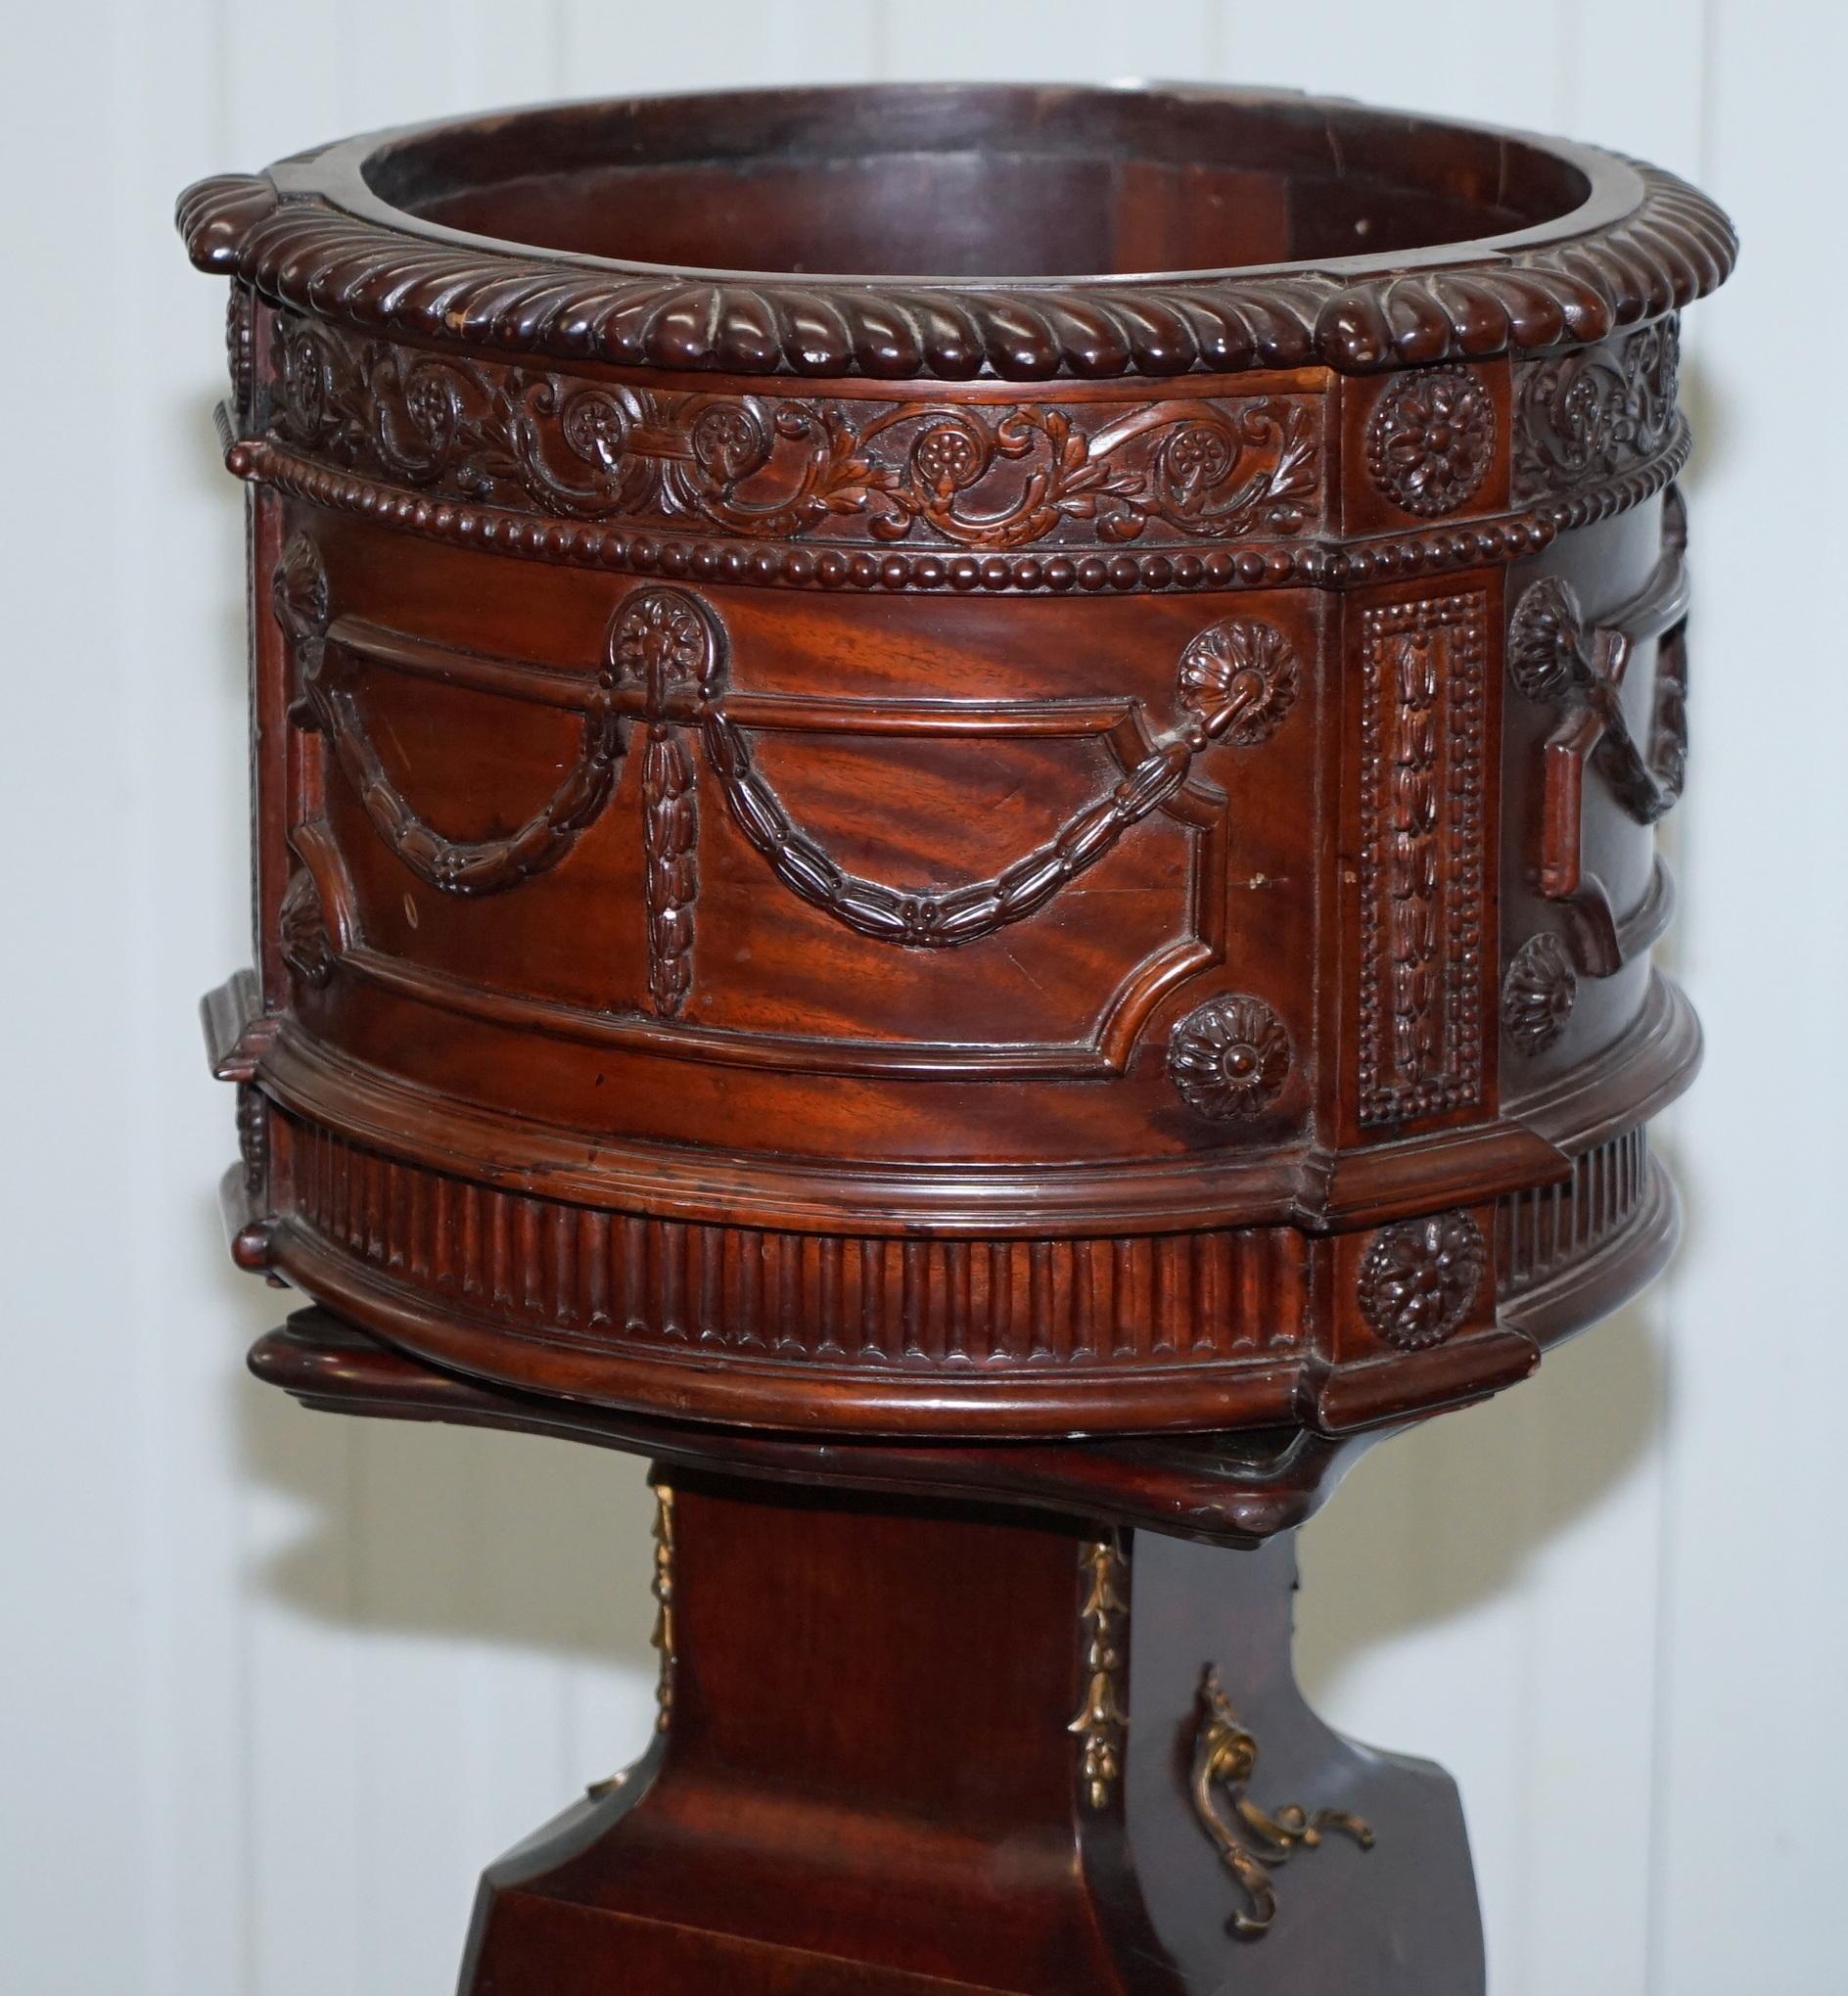 We are delighted to offer for sale this lovely solid mahogany French Imperial plant pot with ornate hand-carved detailing

Please note the delivery fee listed is just a guide, it covers within the M25 only

A good looking and well-made piece,